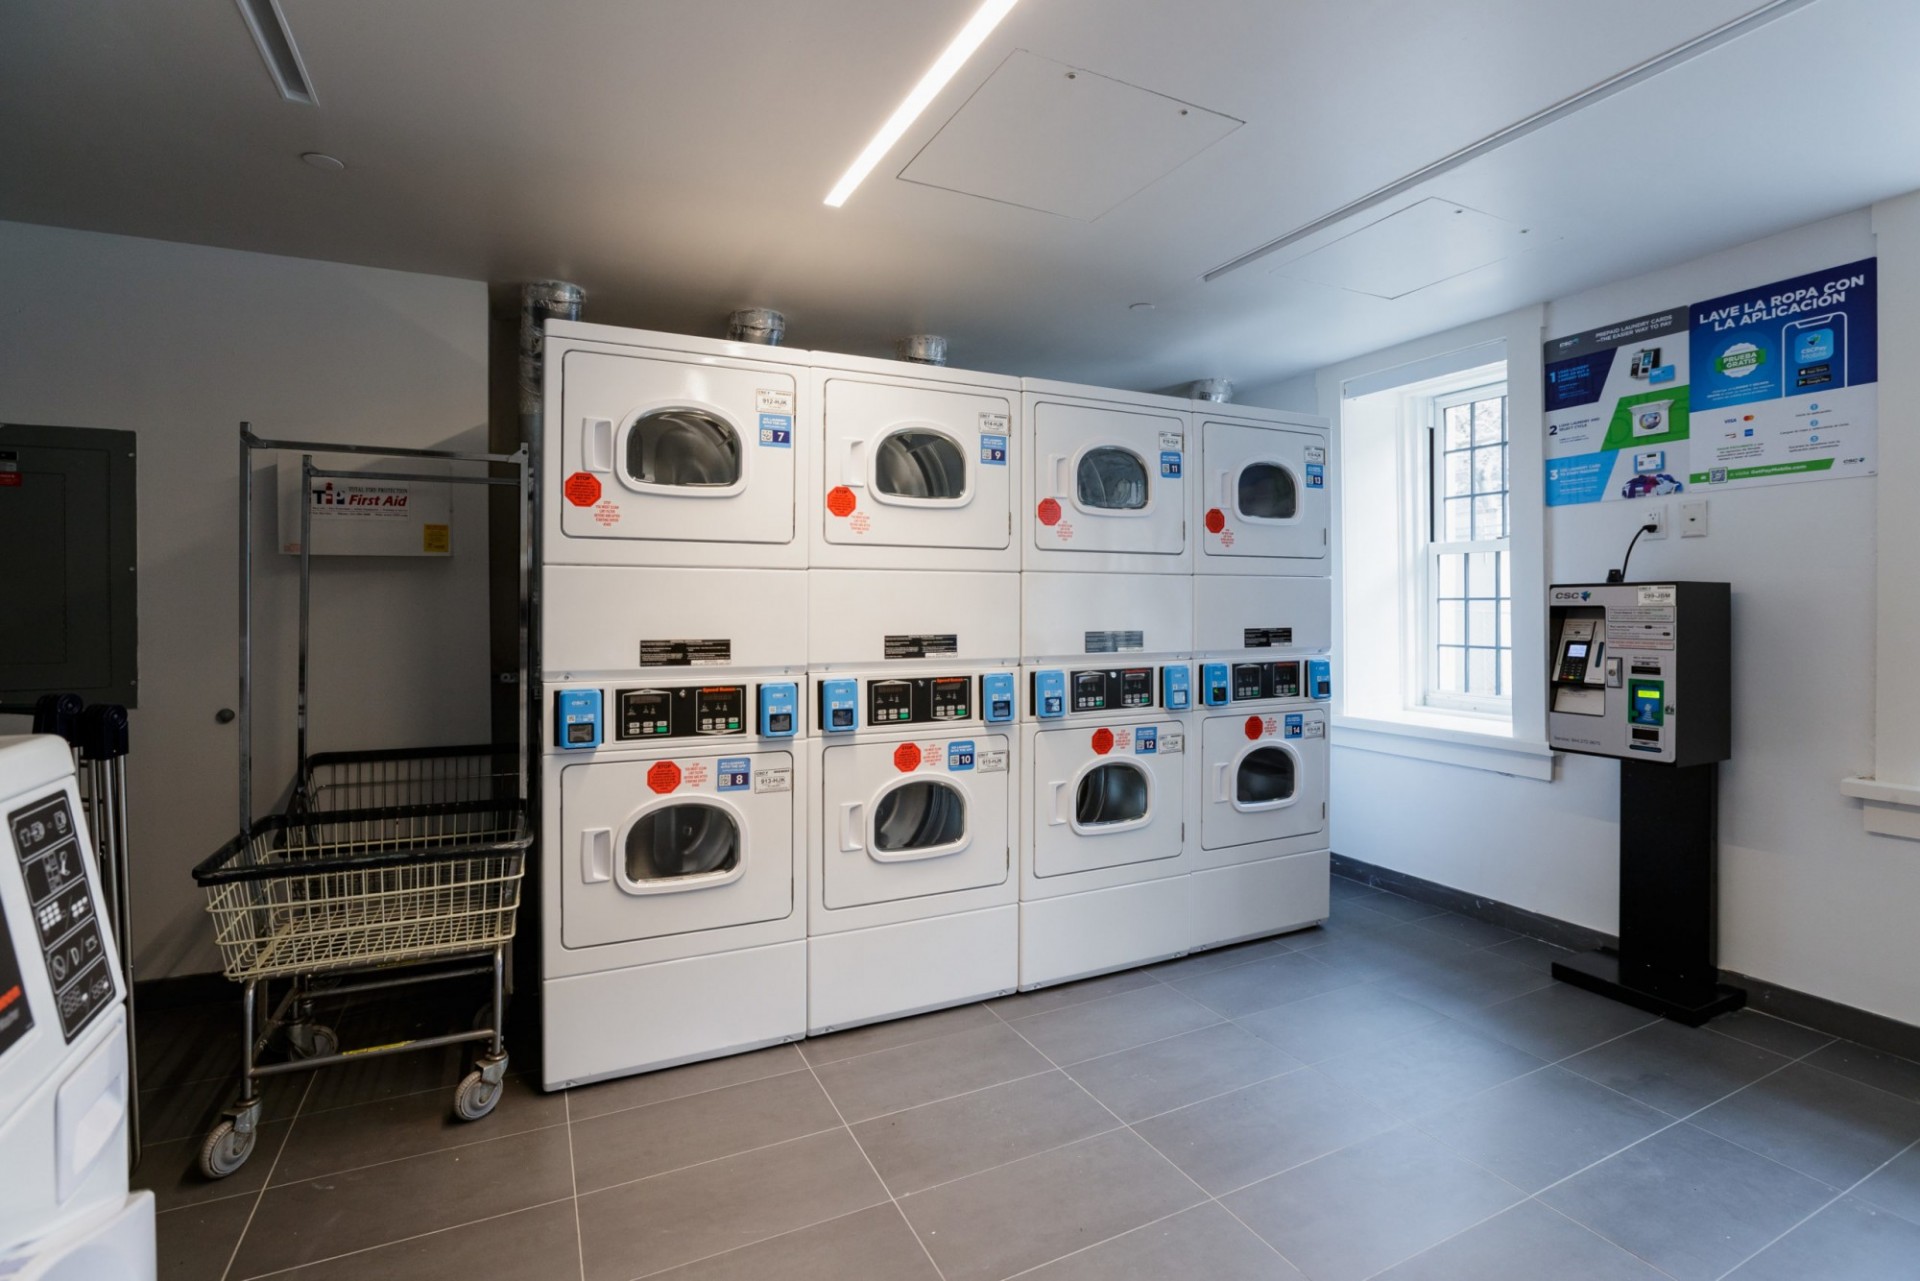 600 West 122nd Street Laundry Room